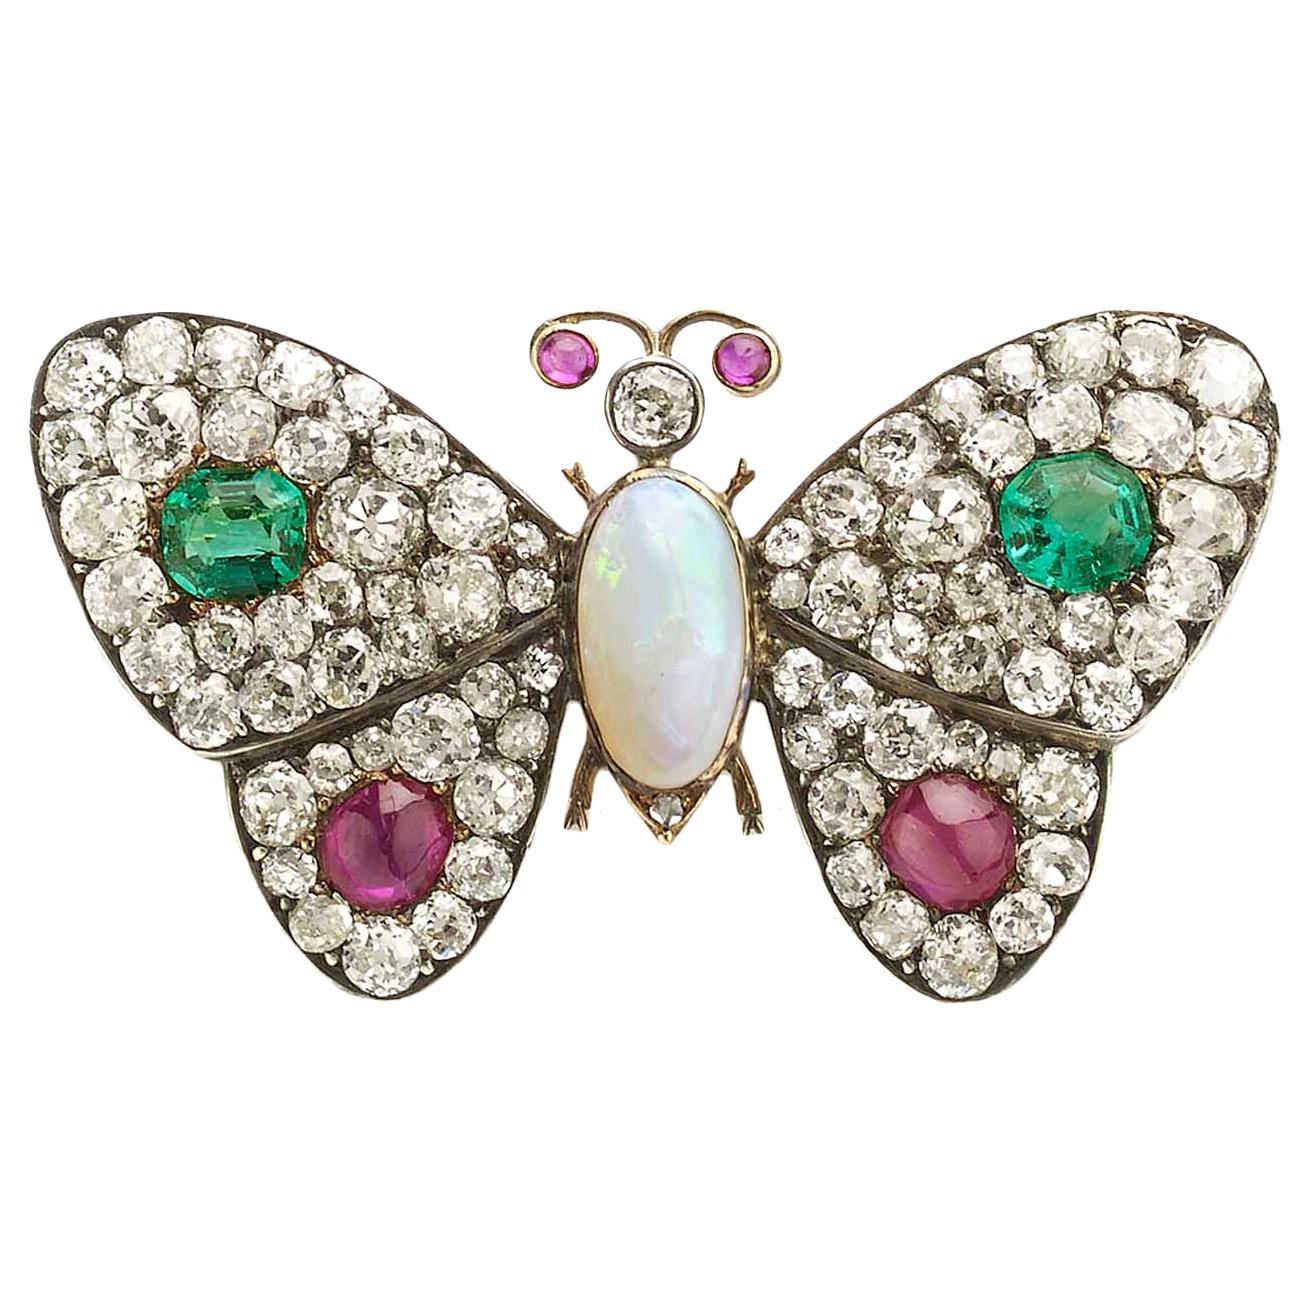 Antique Diamond, Emerald, Ruby, Silver And Gold Butterfly Brooch, Circa 1880